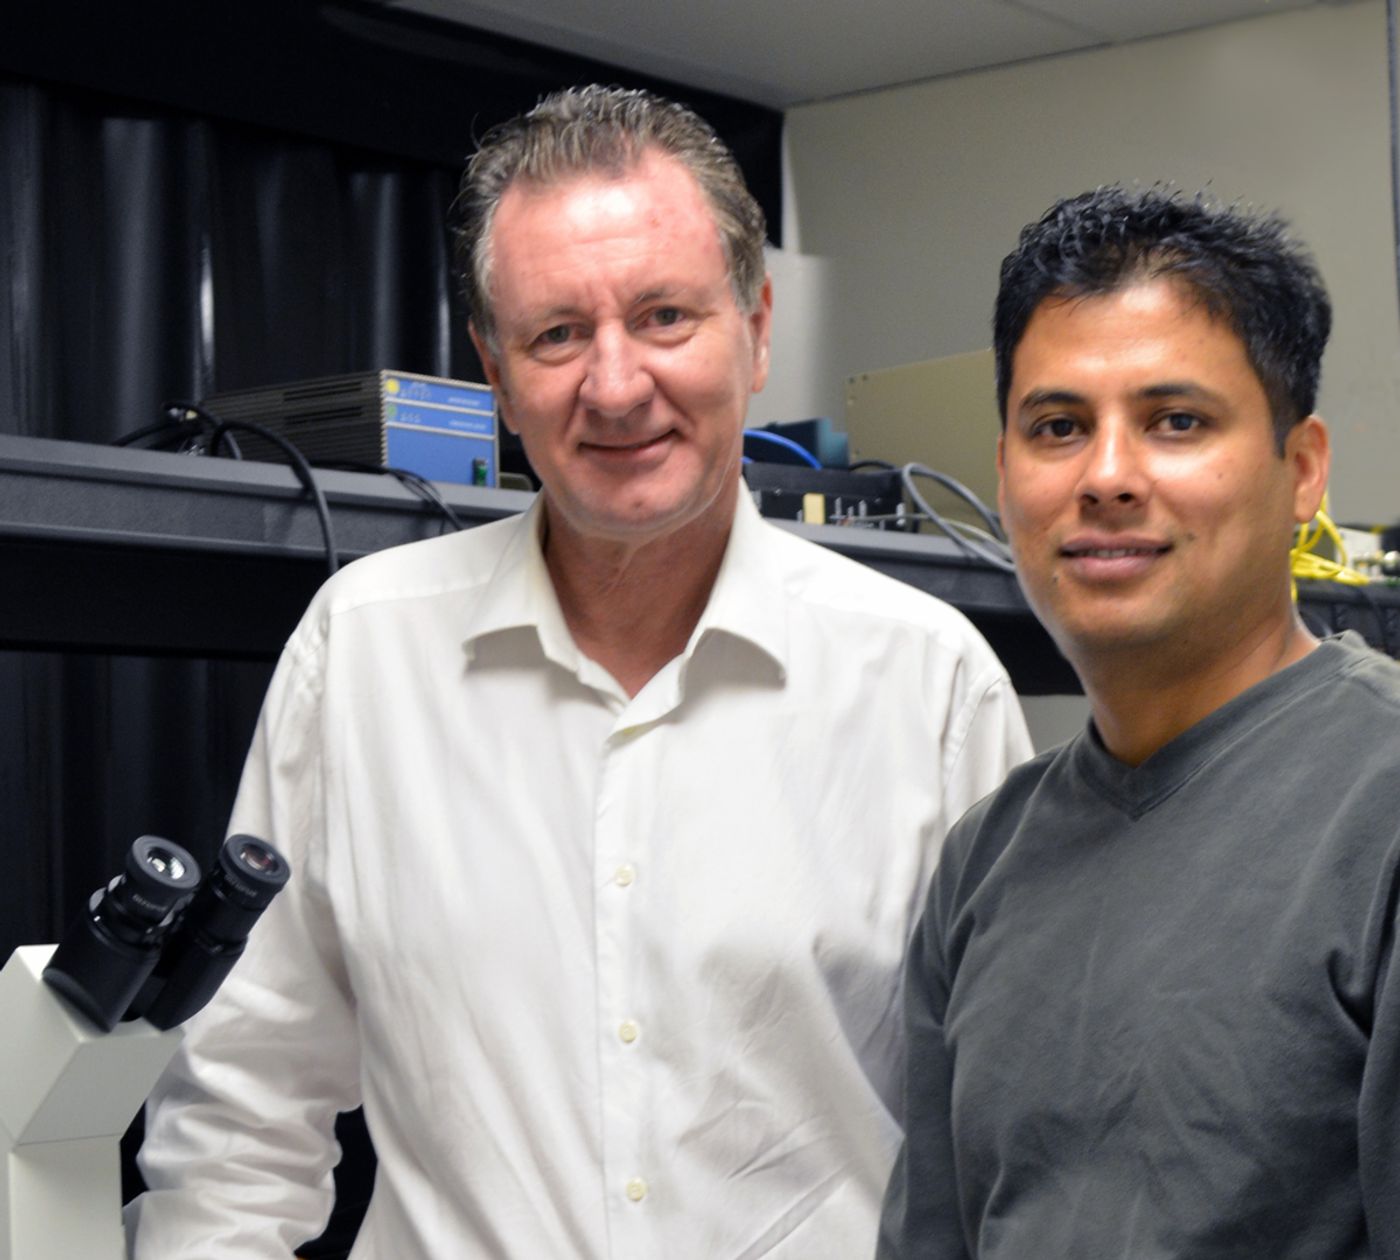 The Scripps Research Institute's Professor David Millar (left) and Research Associate Rajan Lamichhane were among the authors of the new paper.